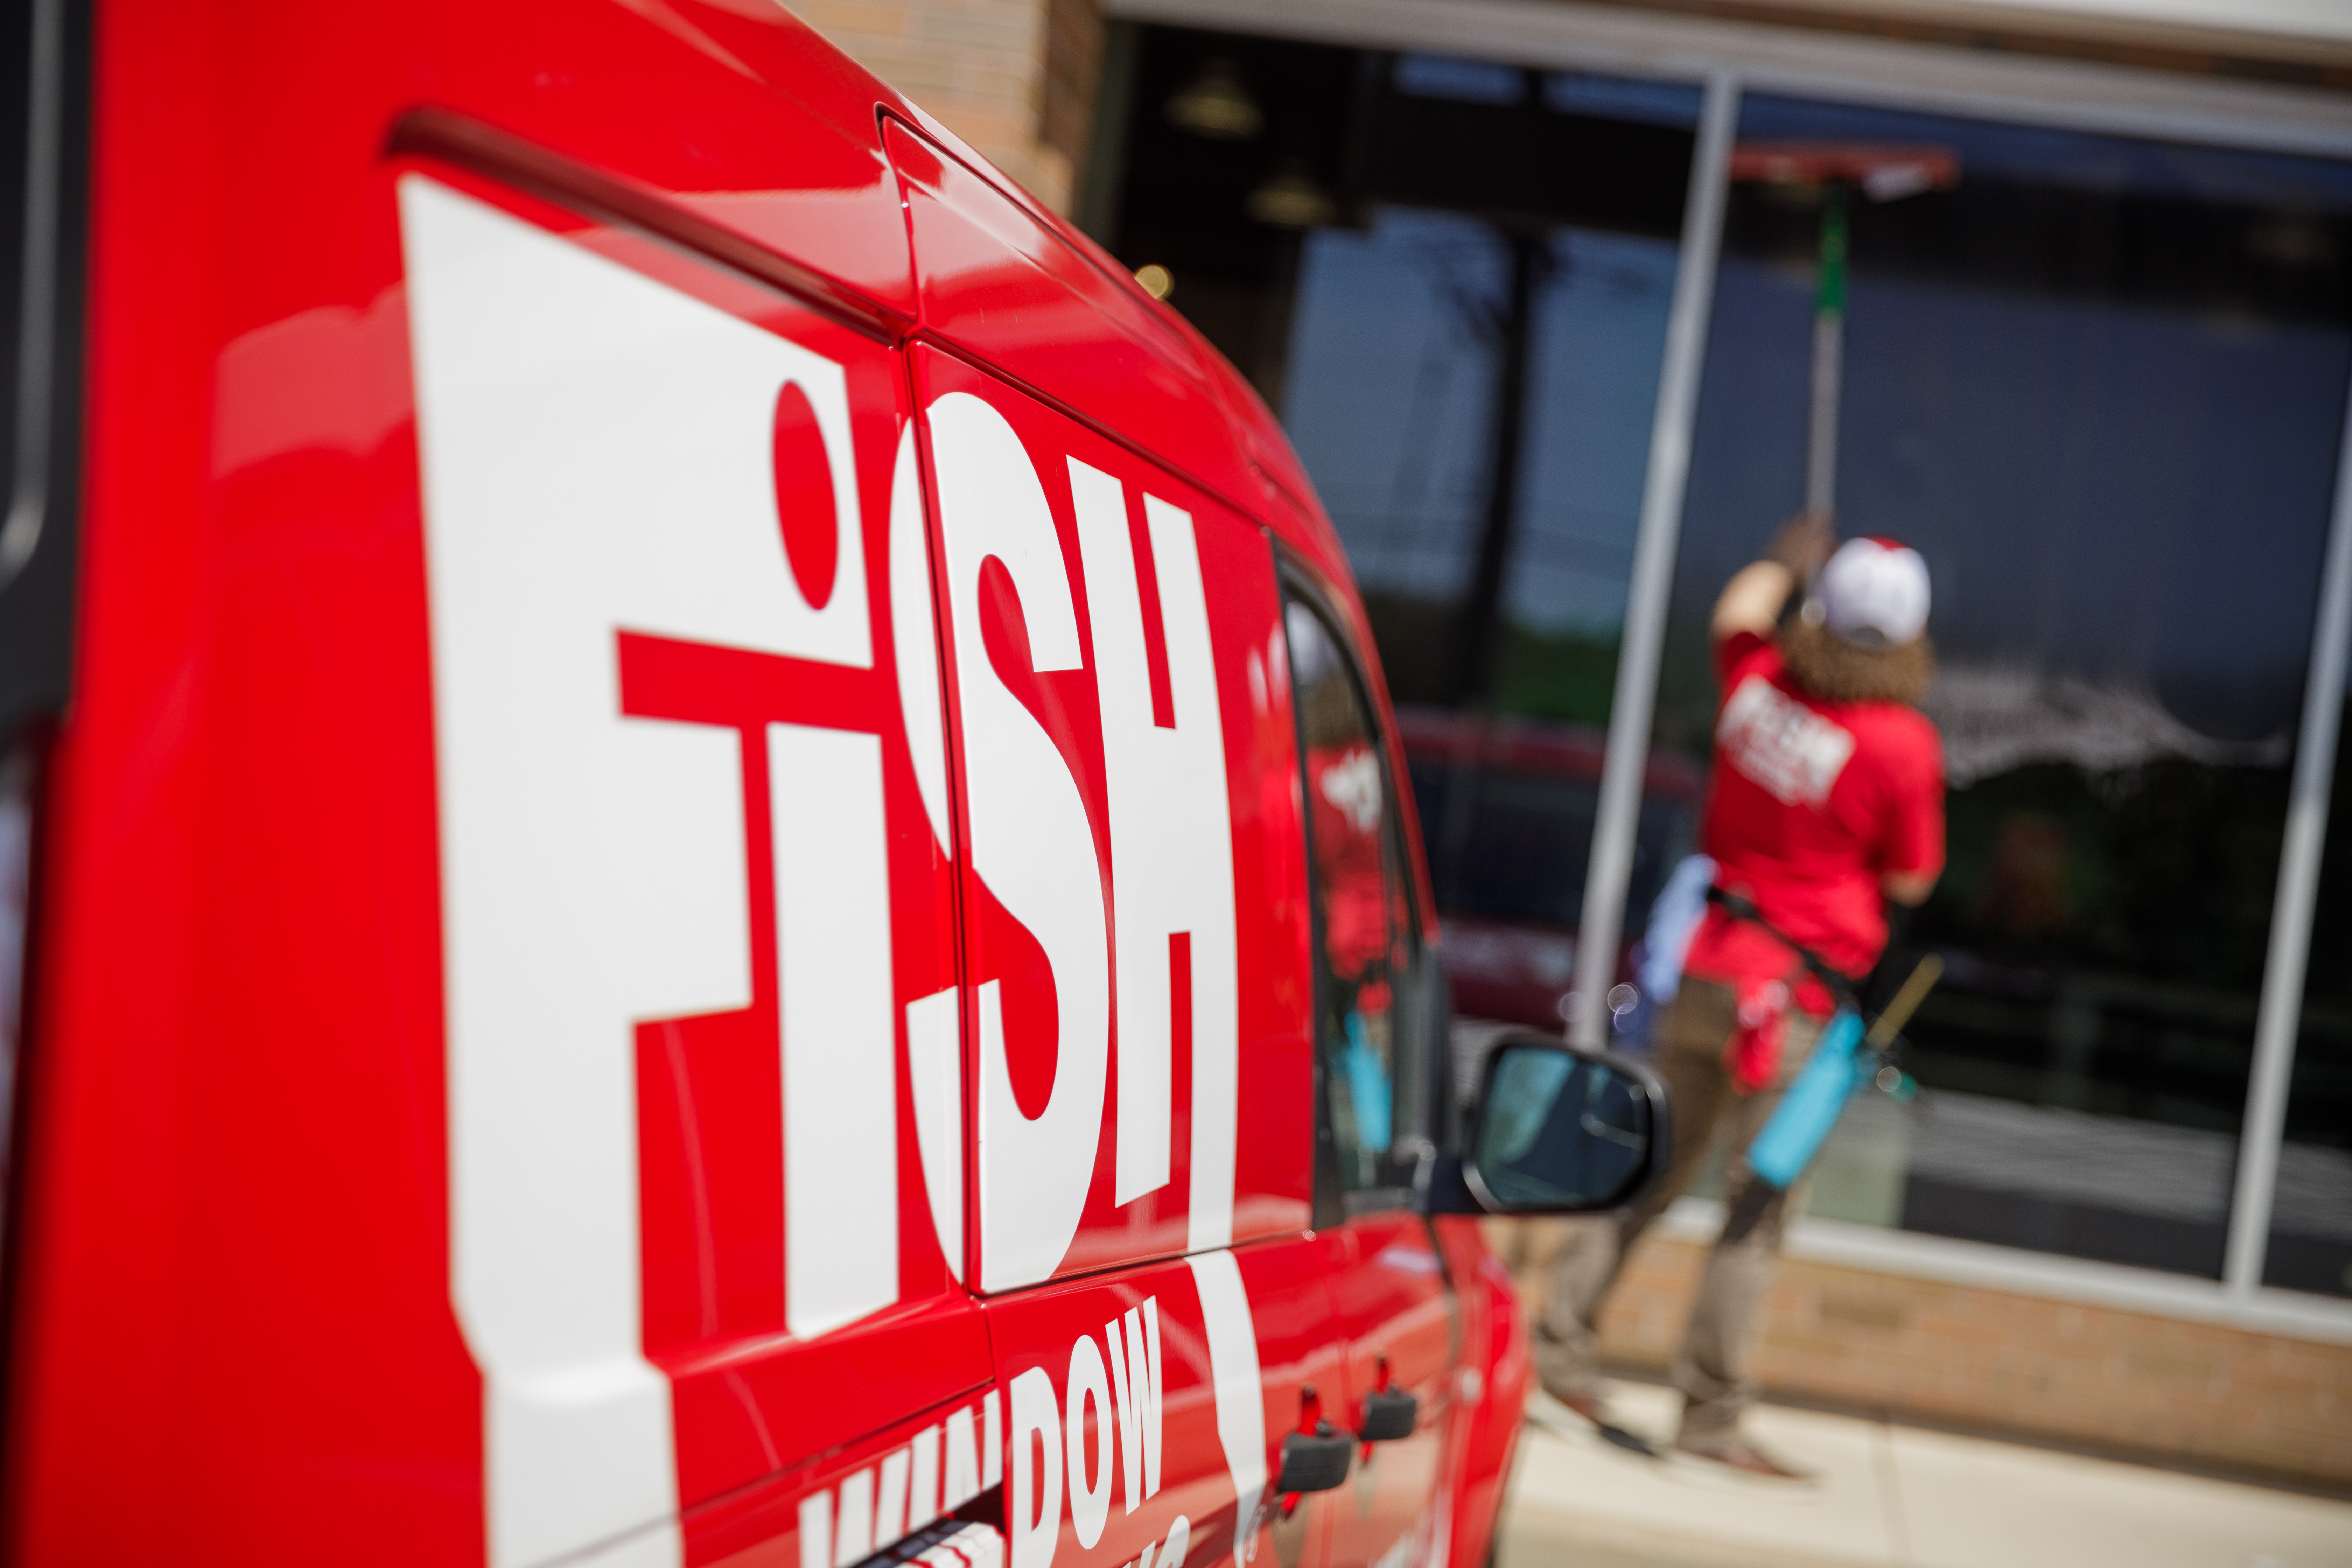 Fish Window Cleaning Van and Cleaner Cleaning Storefont Windows